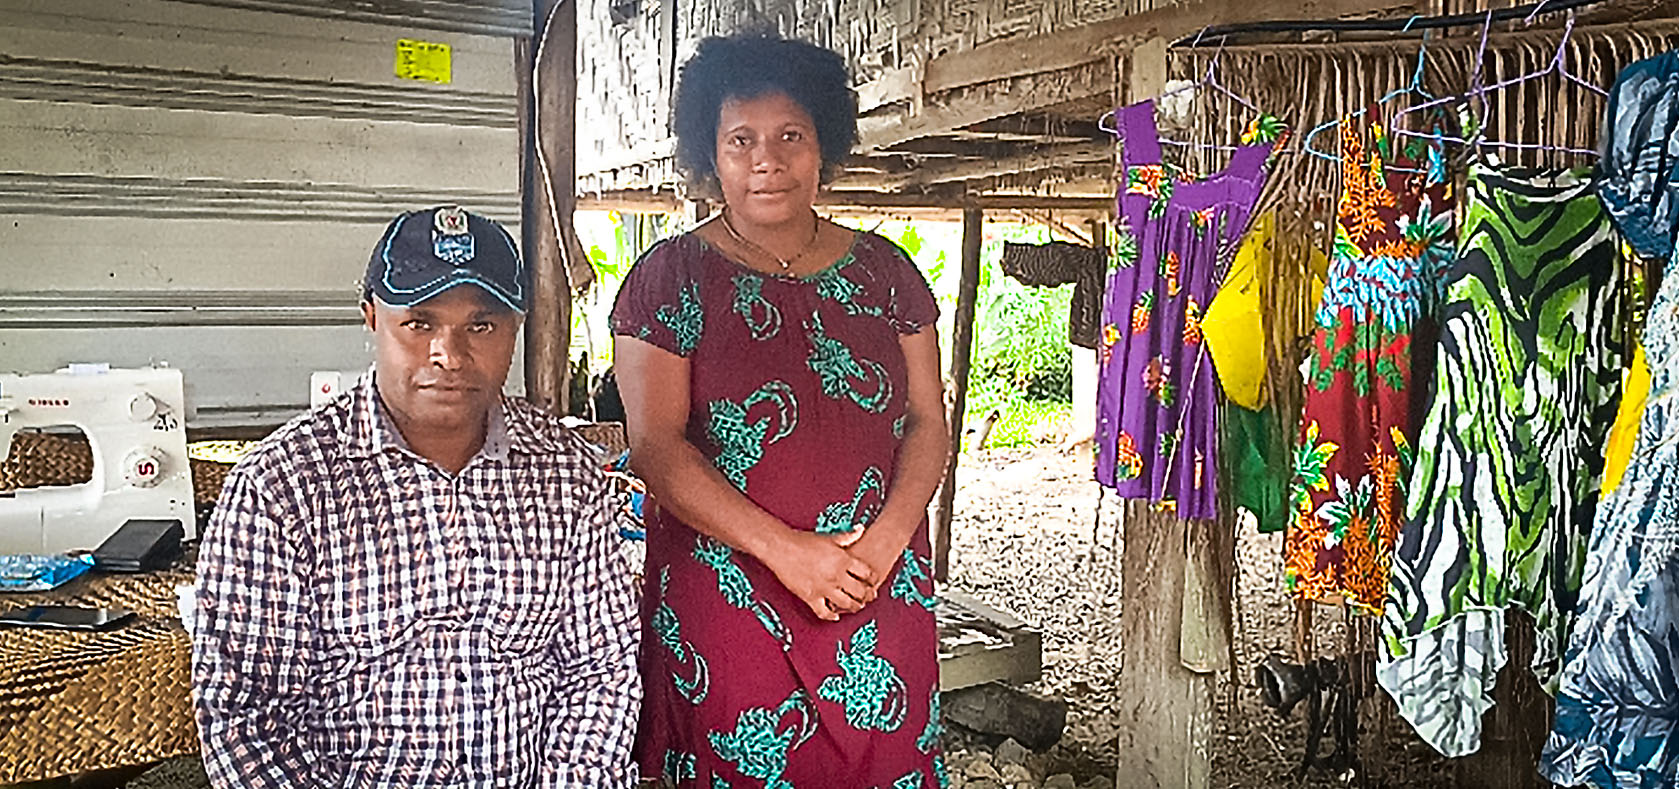 Lilian and Joseph Laki pose at her stall in Wewak market in August 2020. Photo: UN Women/Goodshow Bote